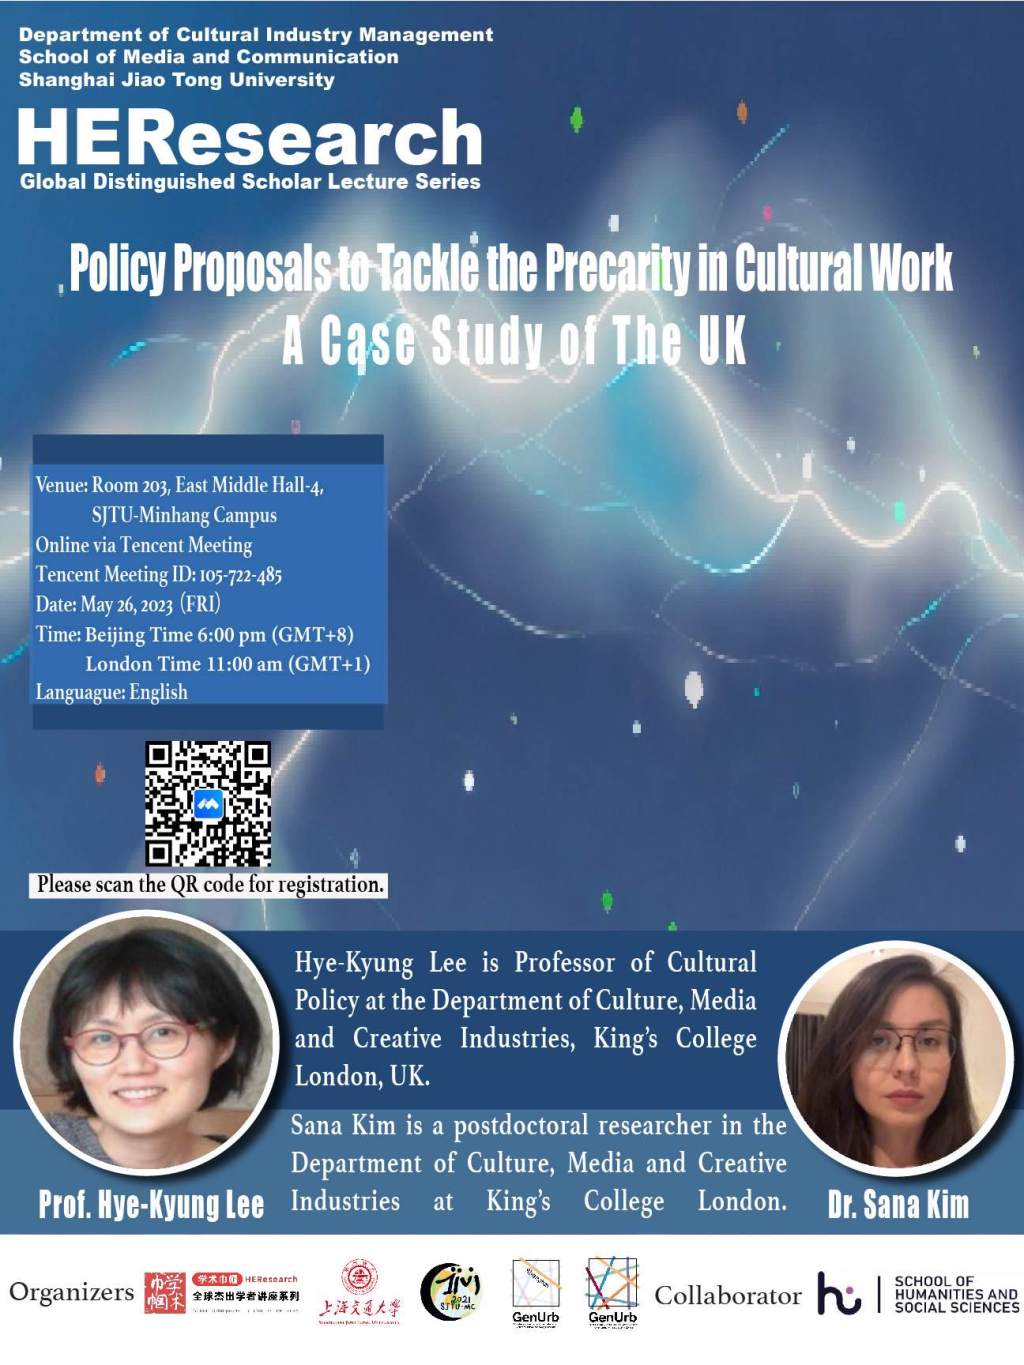 Policy Proposals to Tackle the Precarity in Cultural Work: A Case study of the UK